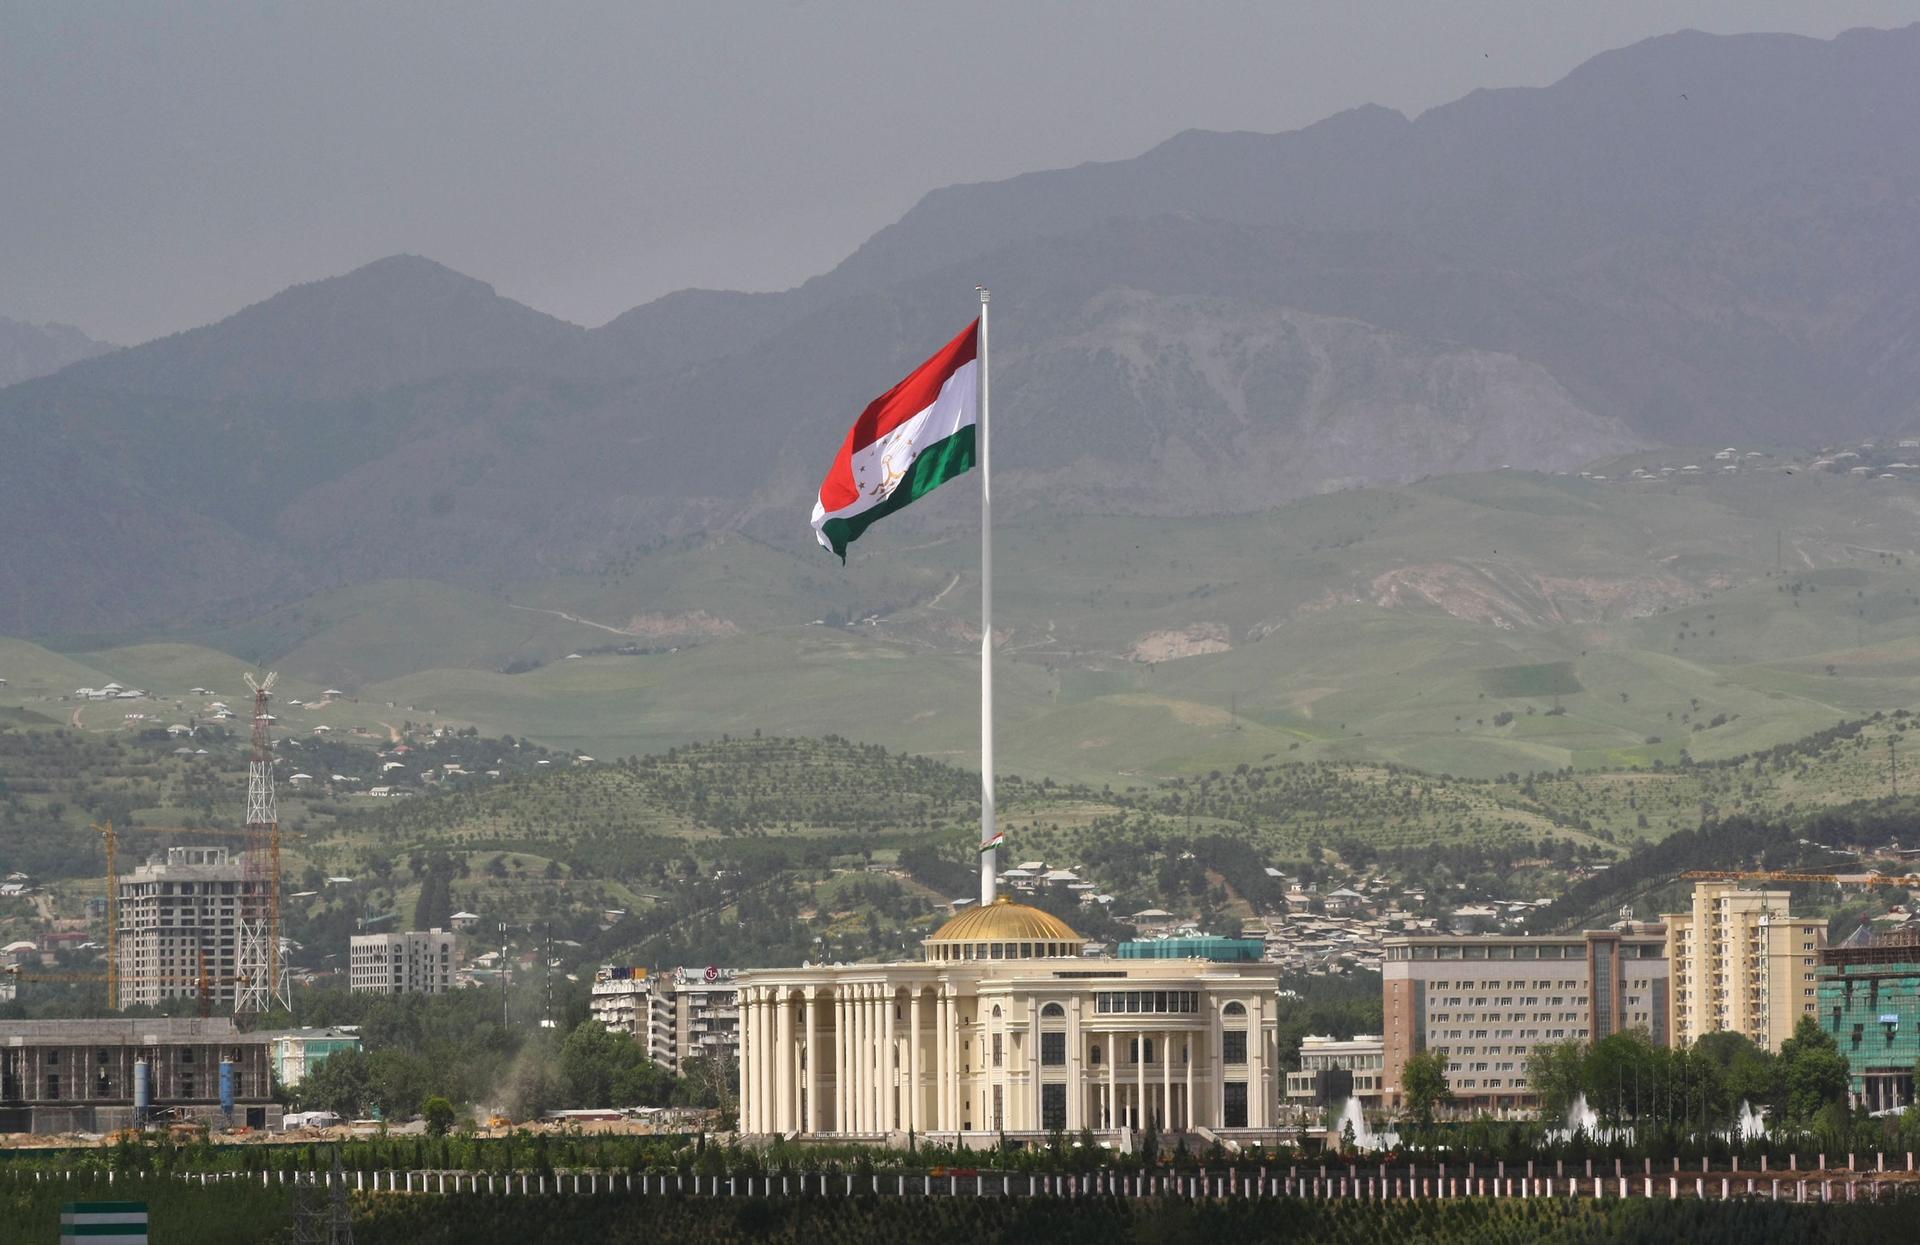 A national flag of Tajikistan is hoisted to the top of the flagpole in Dushanbe, Tajikistan, Tuesday, May 24, 2011.